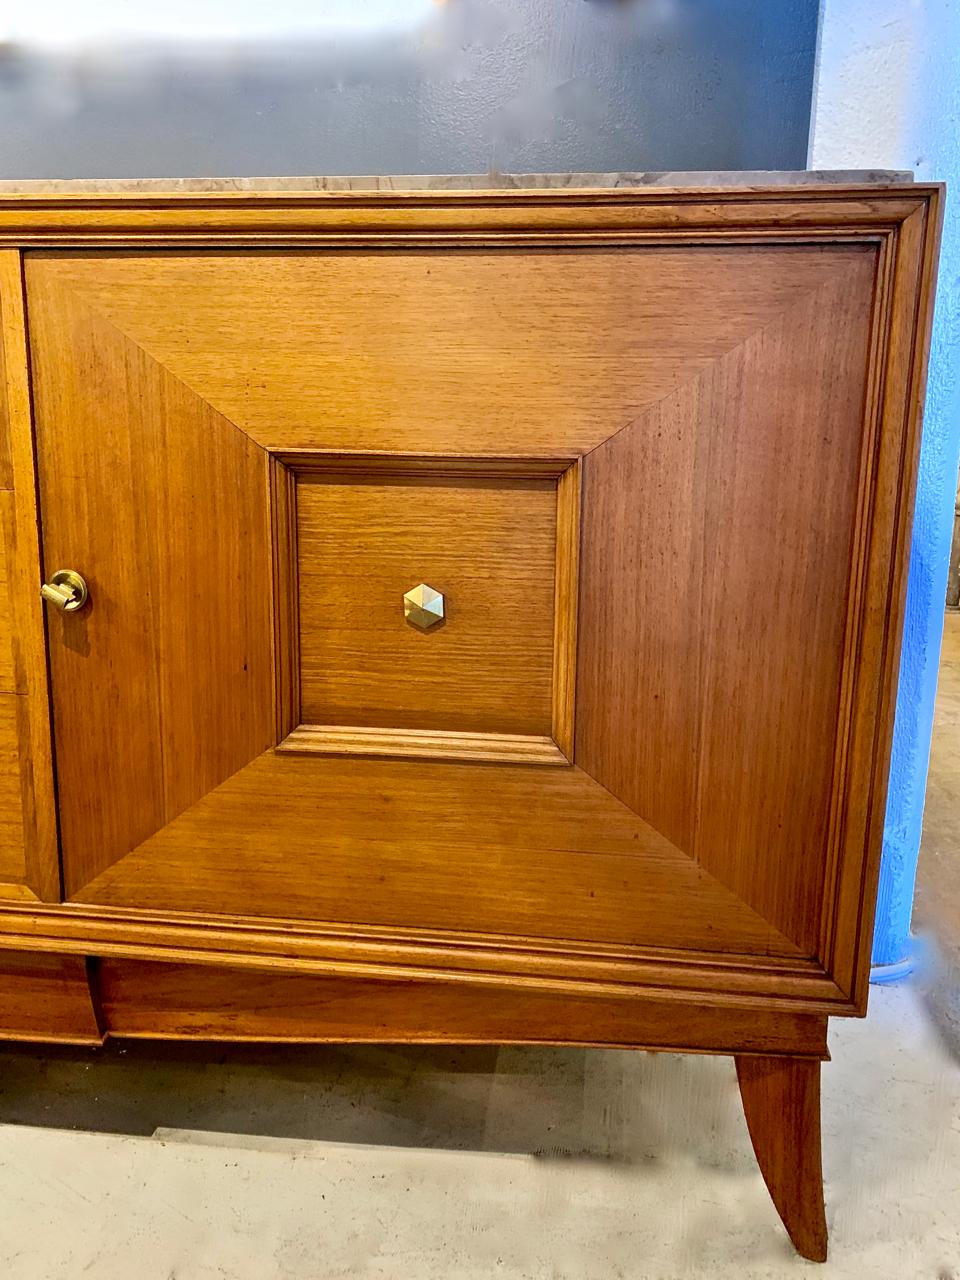 This is a wonderful example of a Moderne Enfilade or sideboard that dates to the 1950s. The Enfilade was crafted of Fine walnut, marble and exceptional quality brass and glass hardware. The central drawers are flanked by cupboard sections of fielded